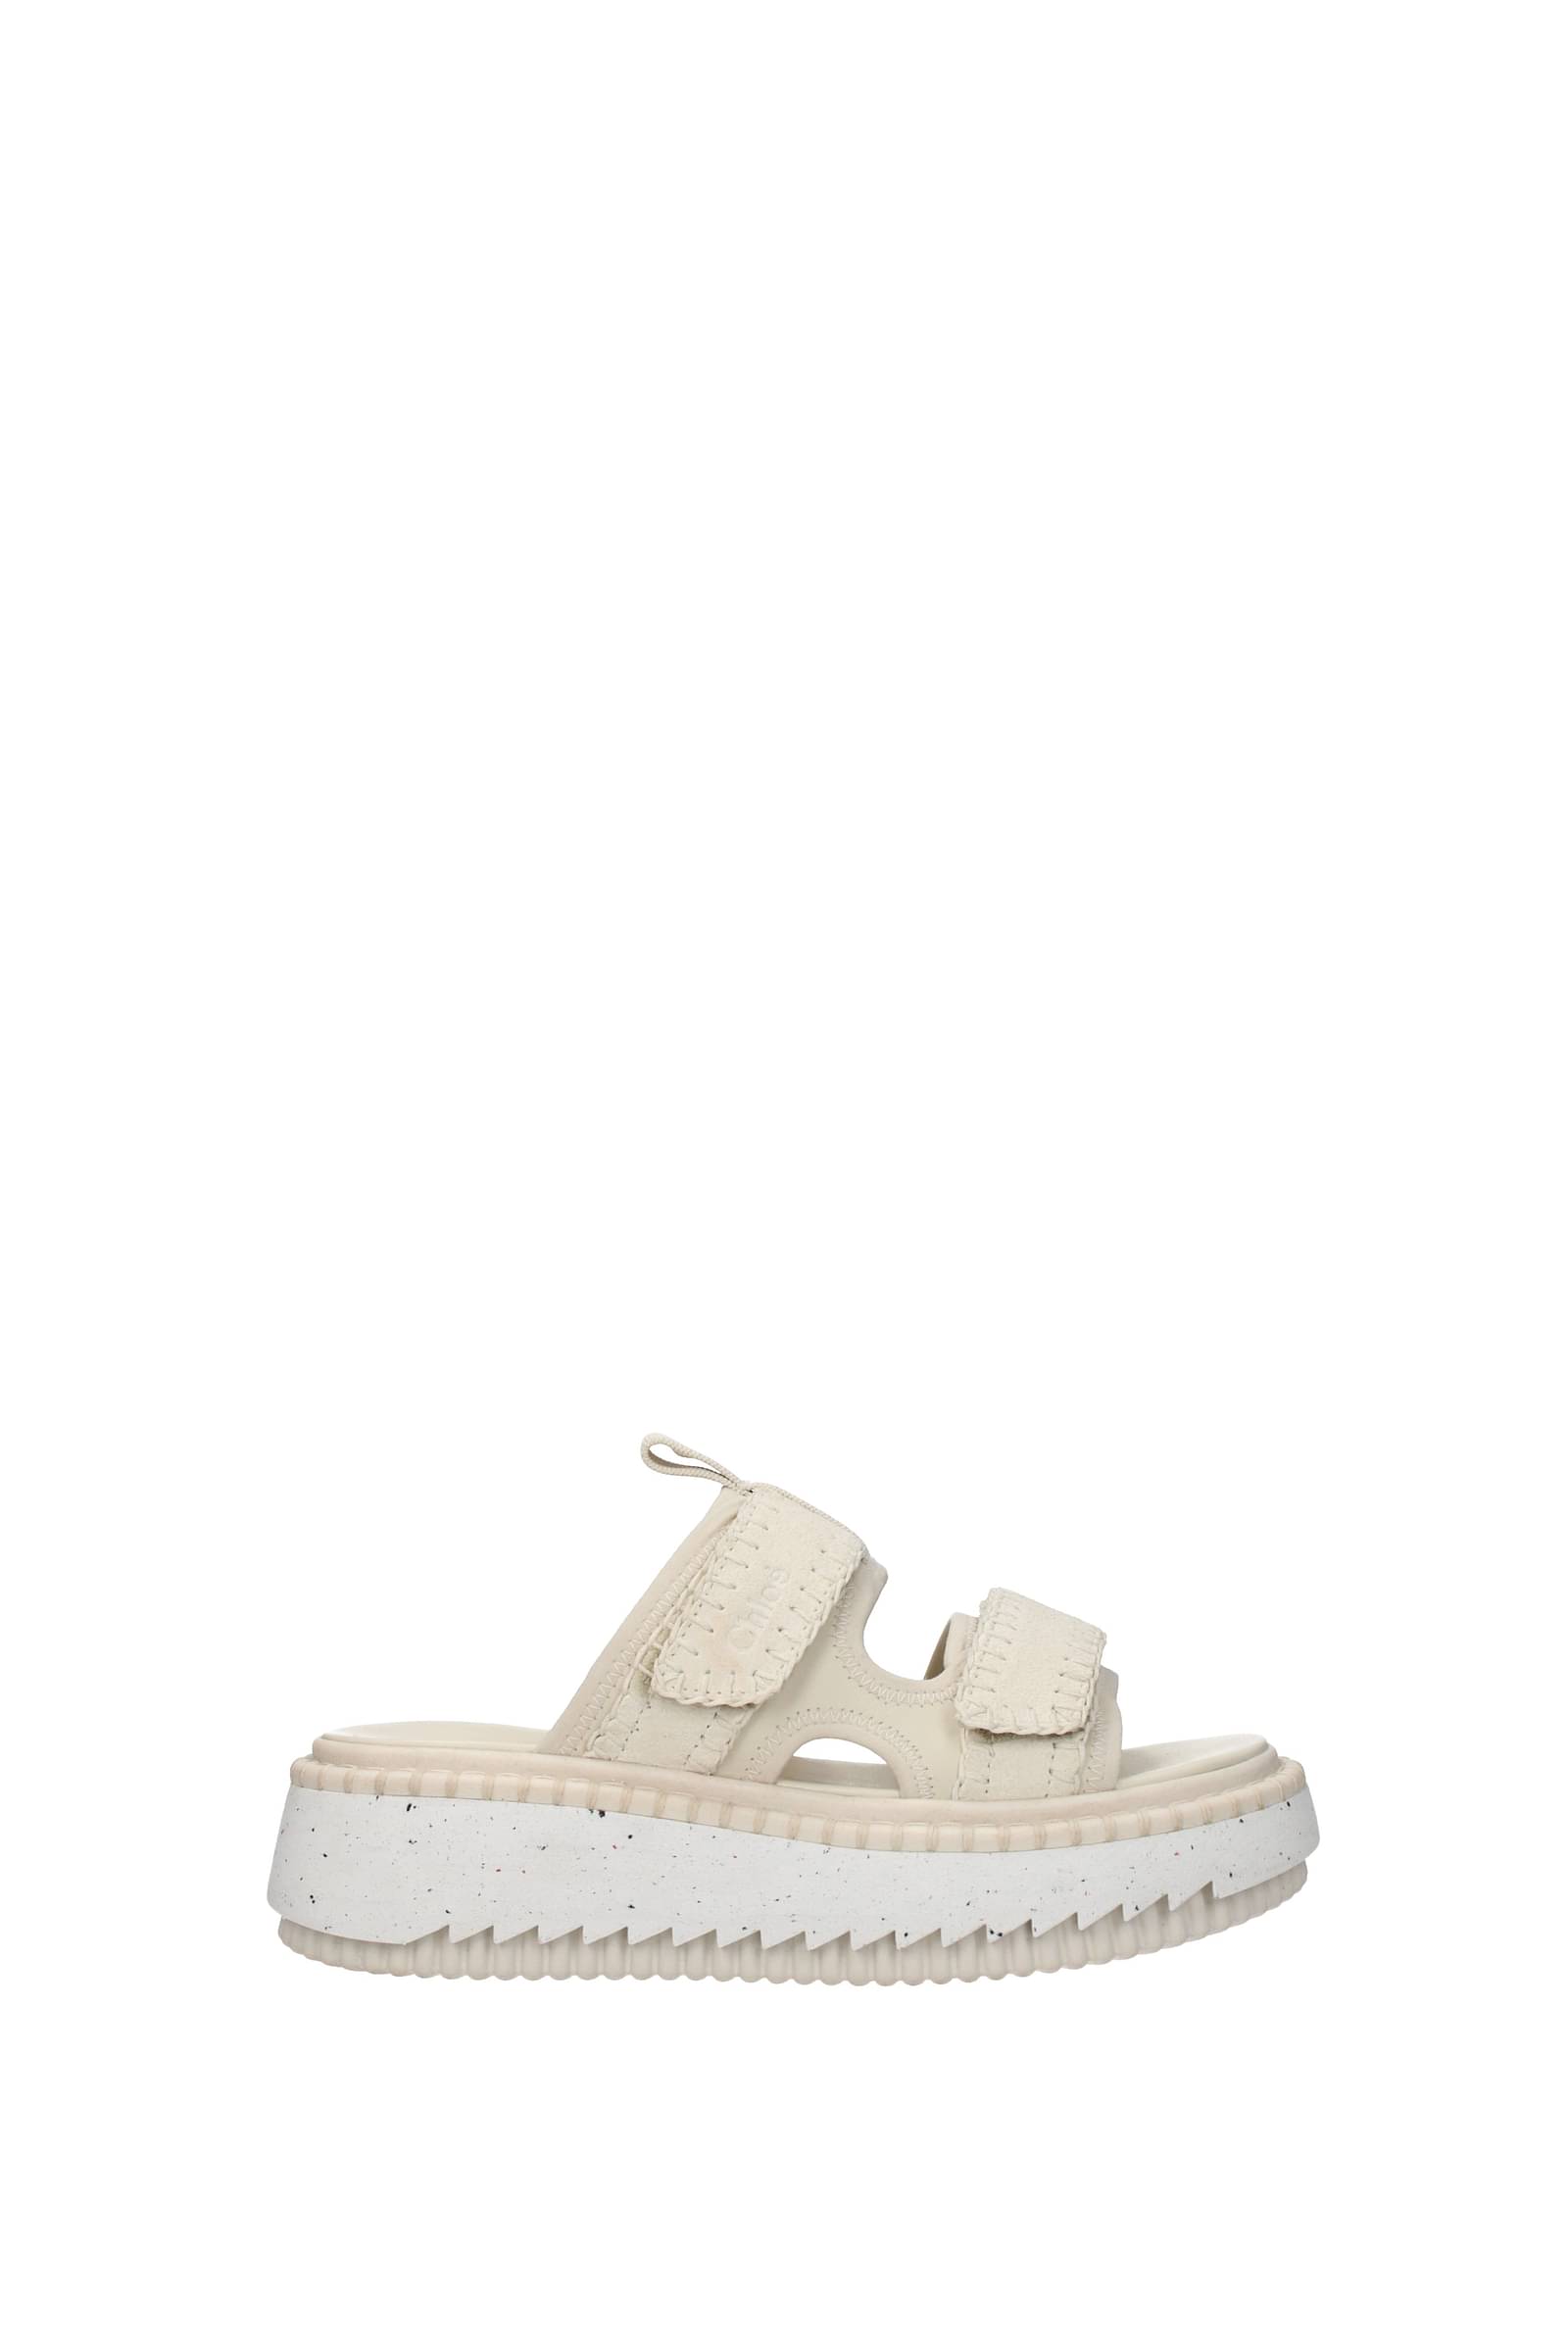 CHLOÉ SLIPPERS AND CLOGS LILLI LEATHER WHITE IVORY